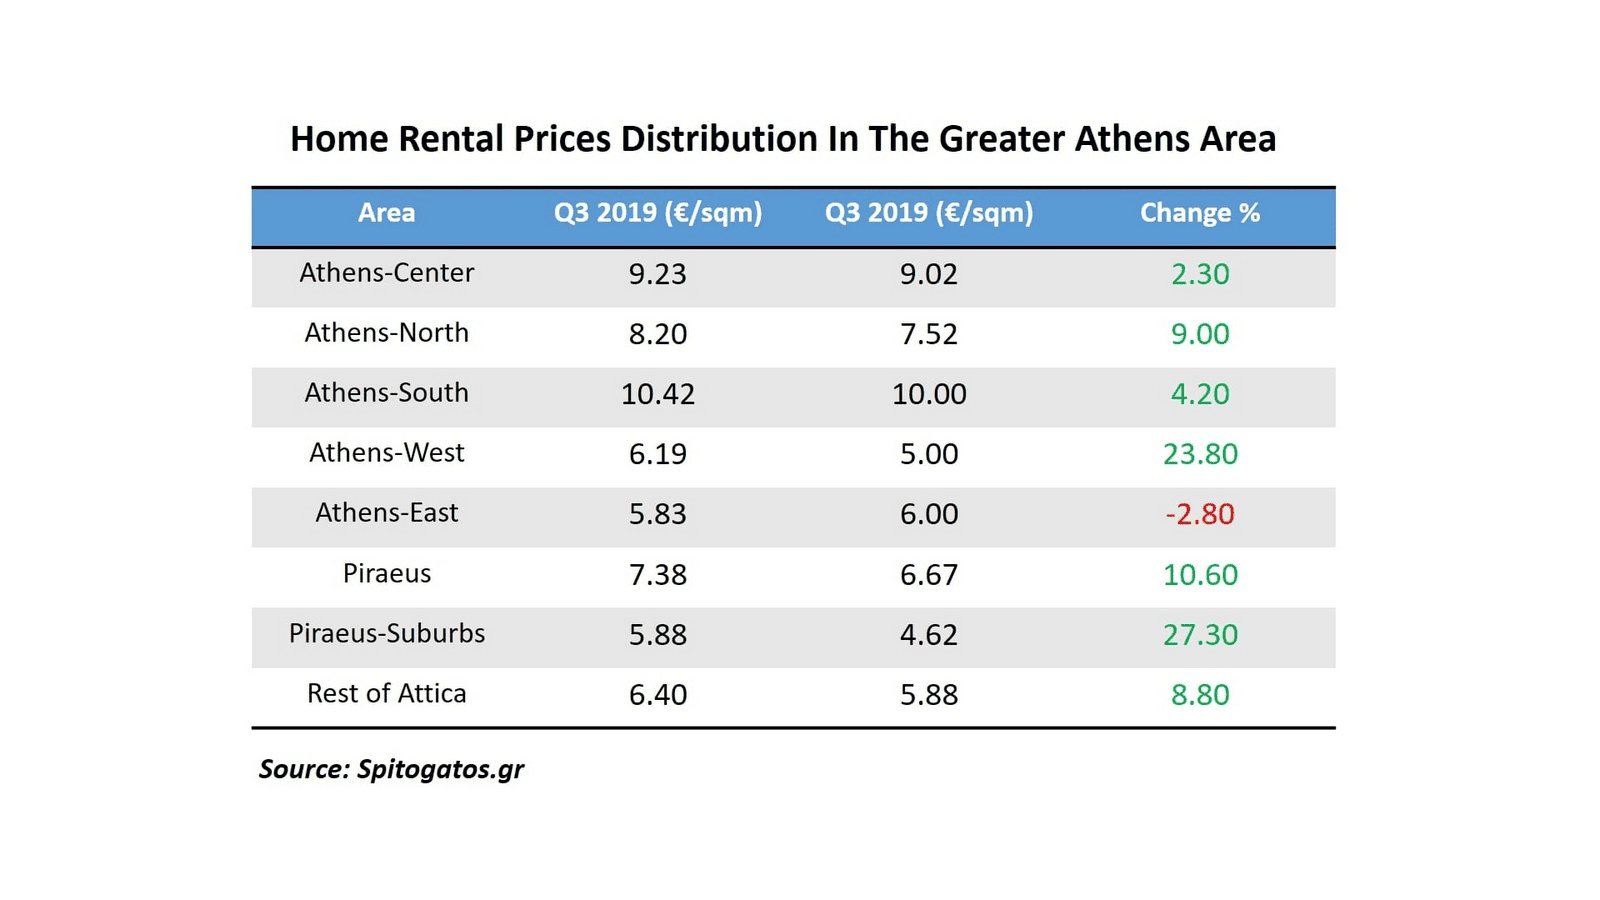 Home Renatl Prices Distribution in The Greater Athens Area